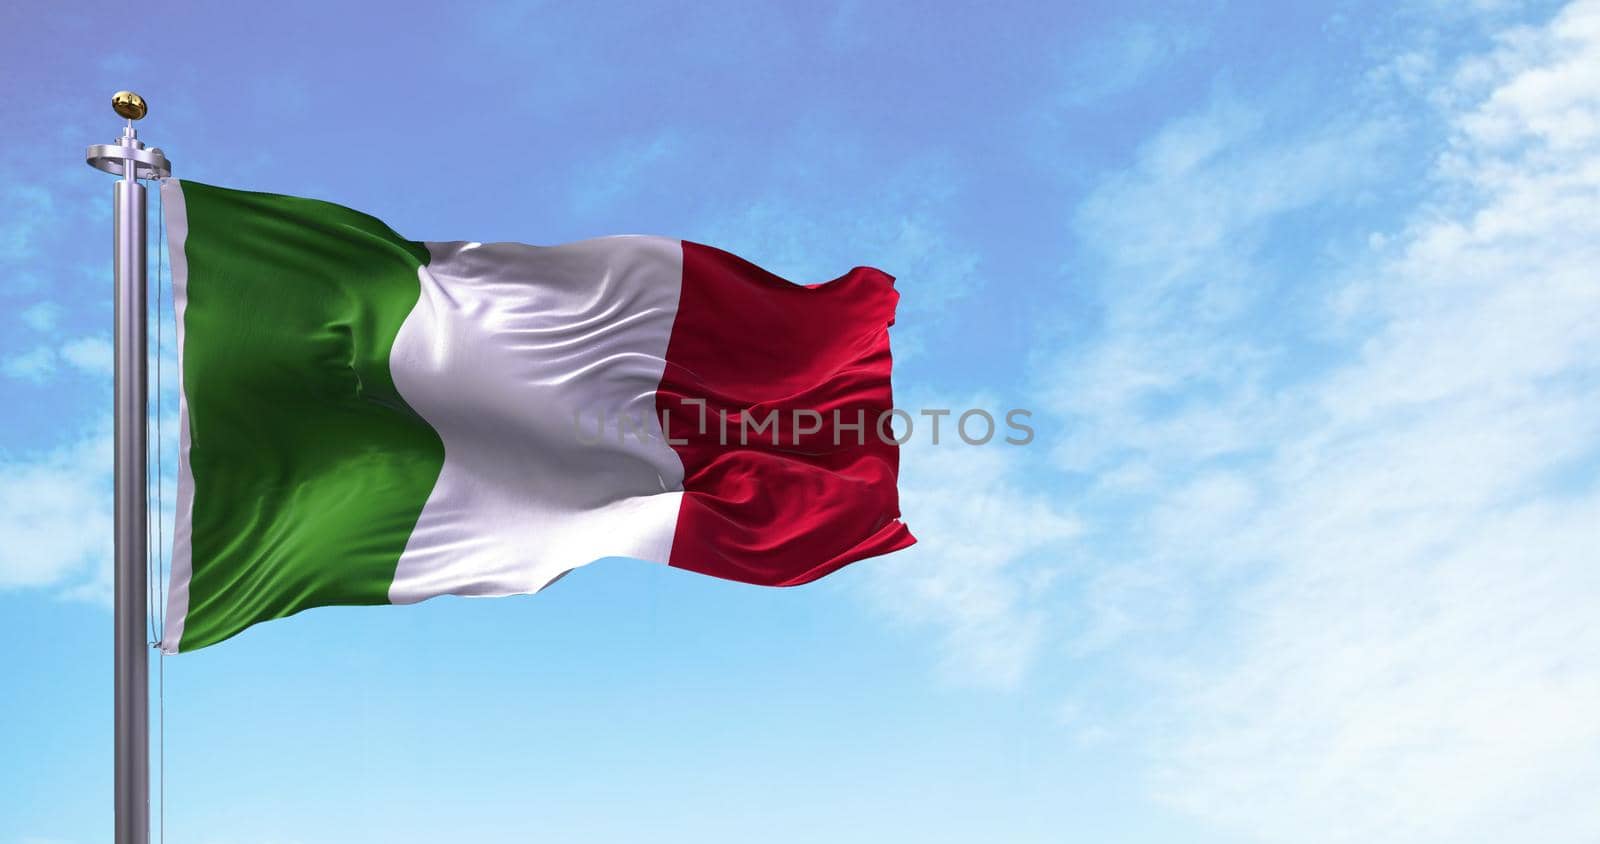 The national flag of Italy flying in the wind by rarrarorro